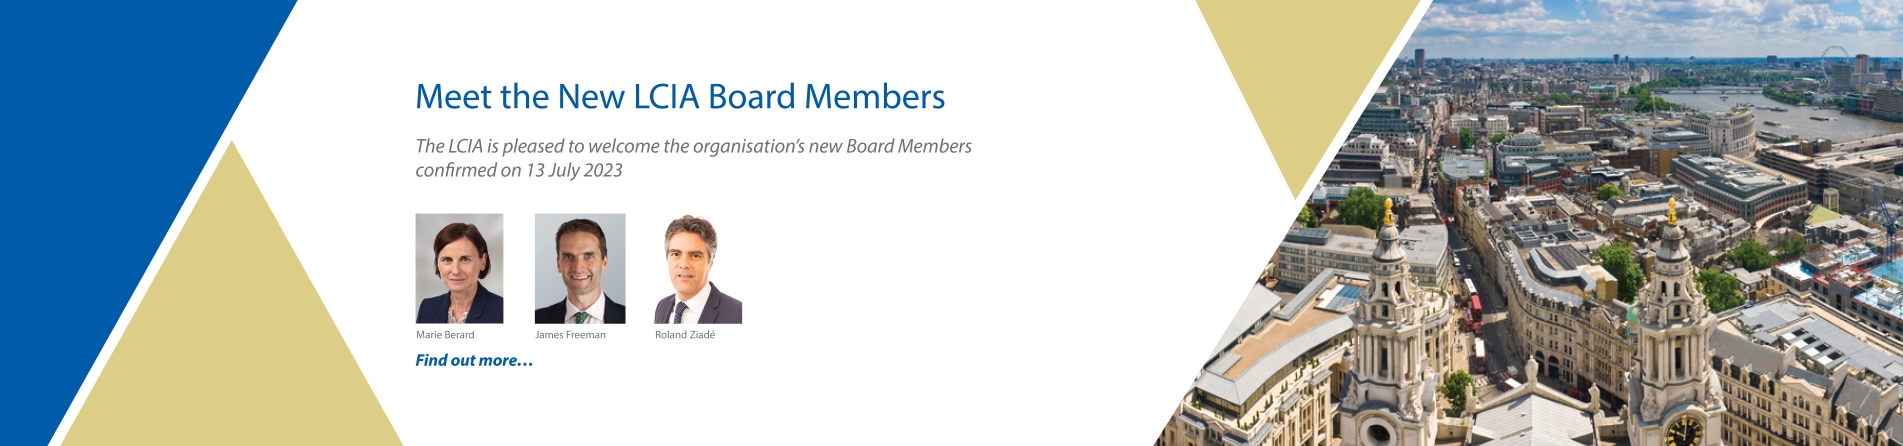 Changes to the LCIA Board